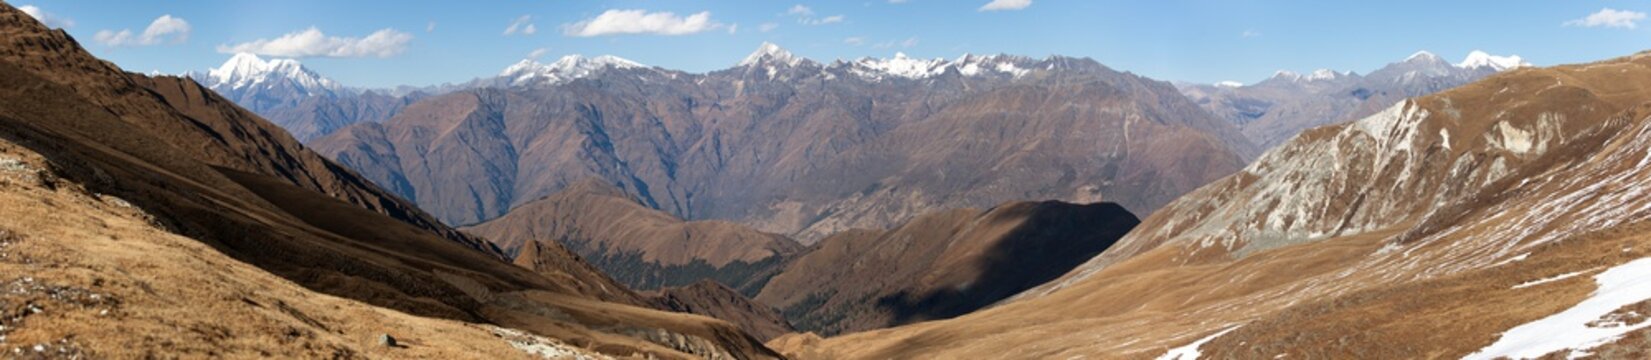 Panoramic view from Jang La pass to Lower Dolpo area